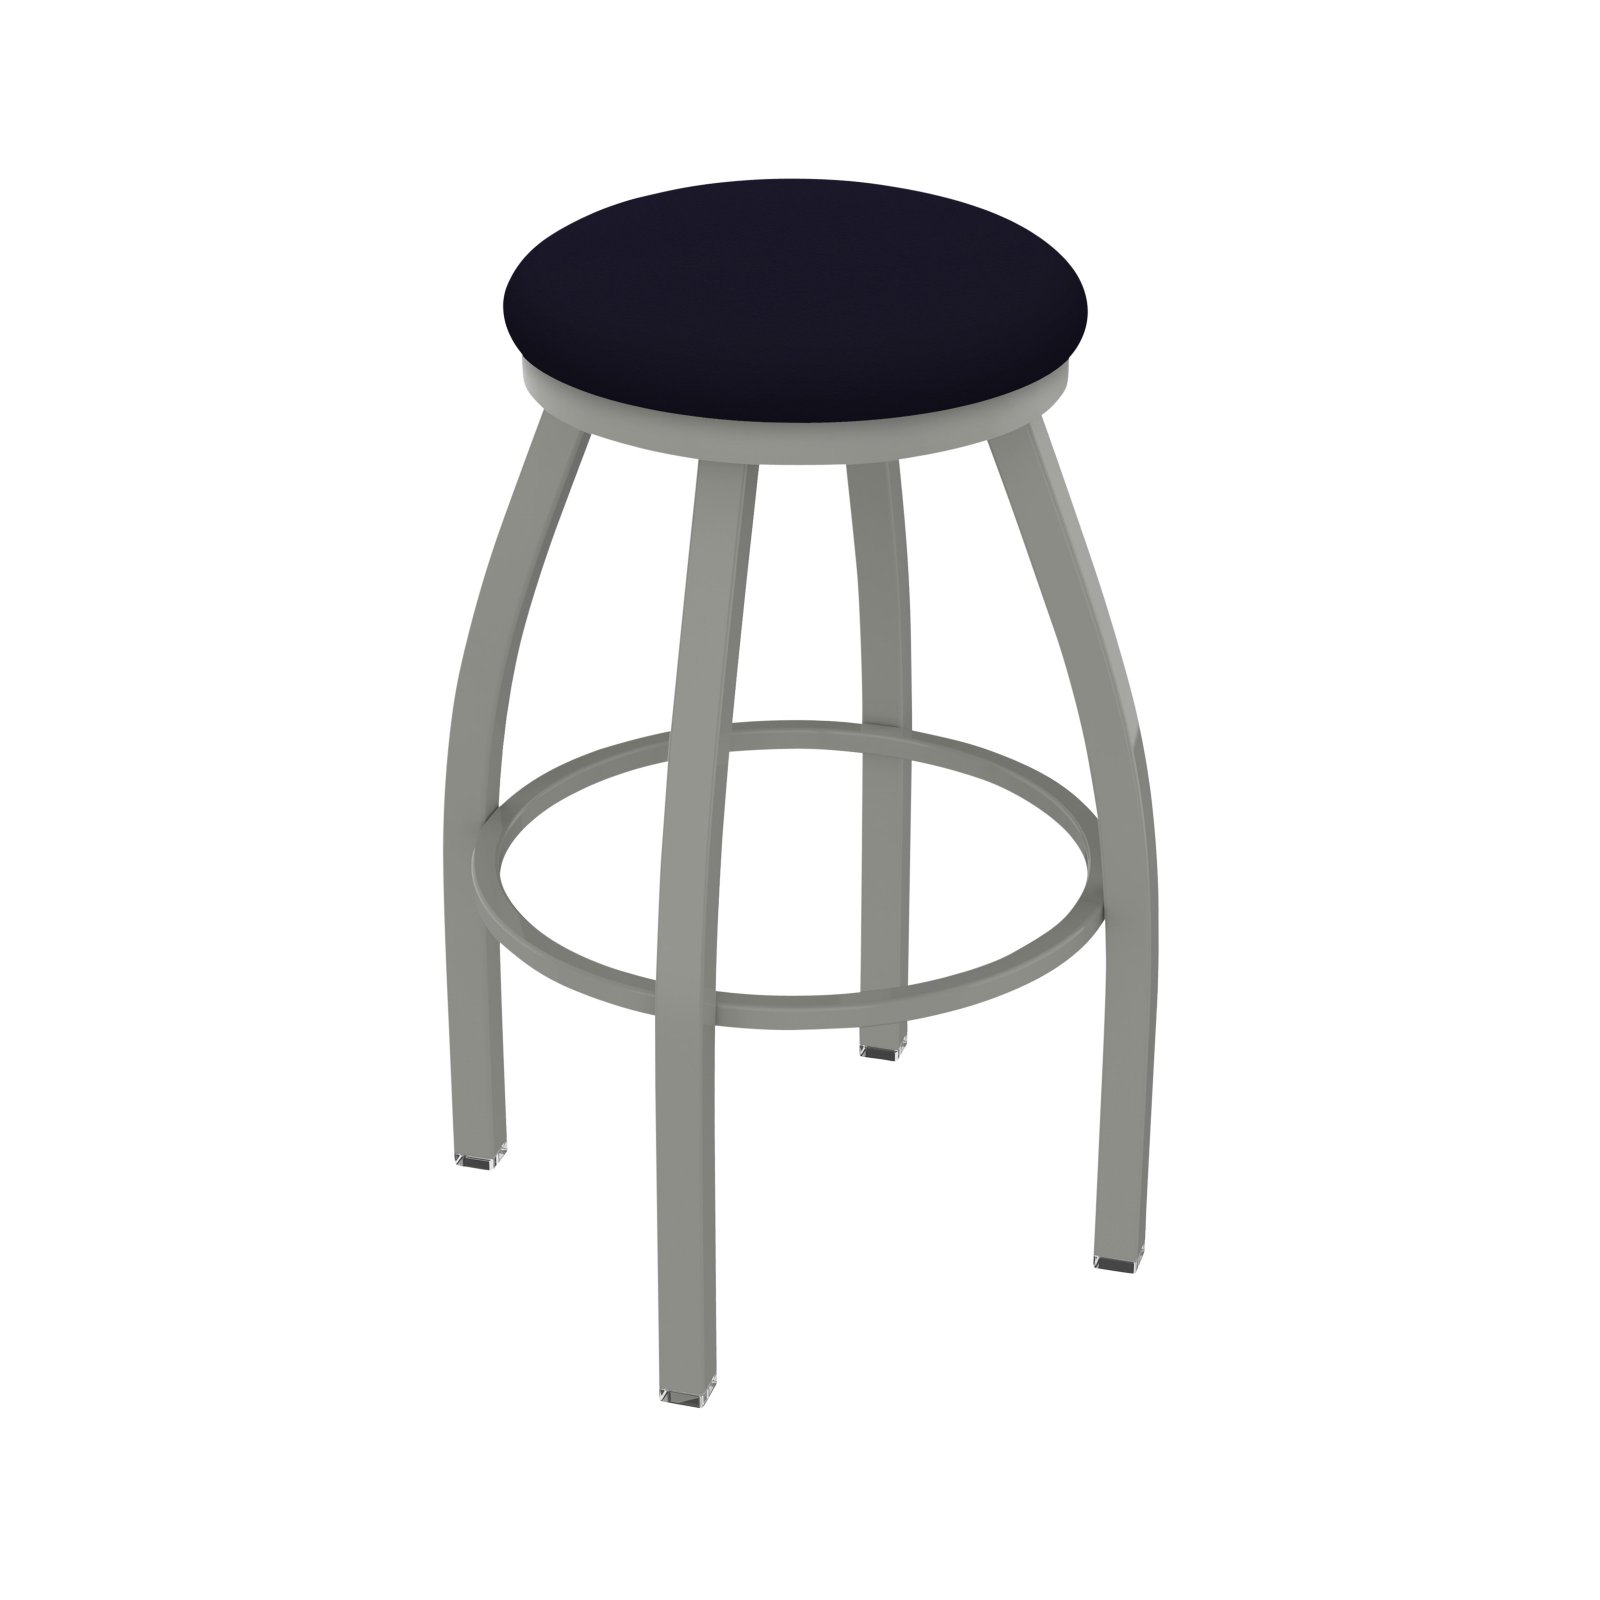 Holland Bar Stool Co XL 802 Misha 25 in. Faux Leather Swivel Counter Stool - image 2 of 2